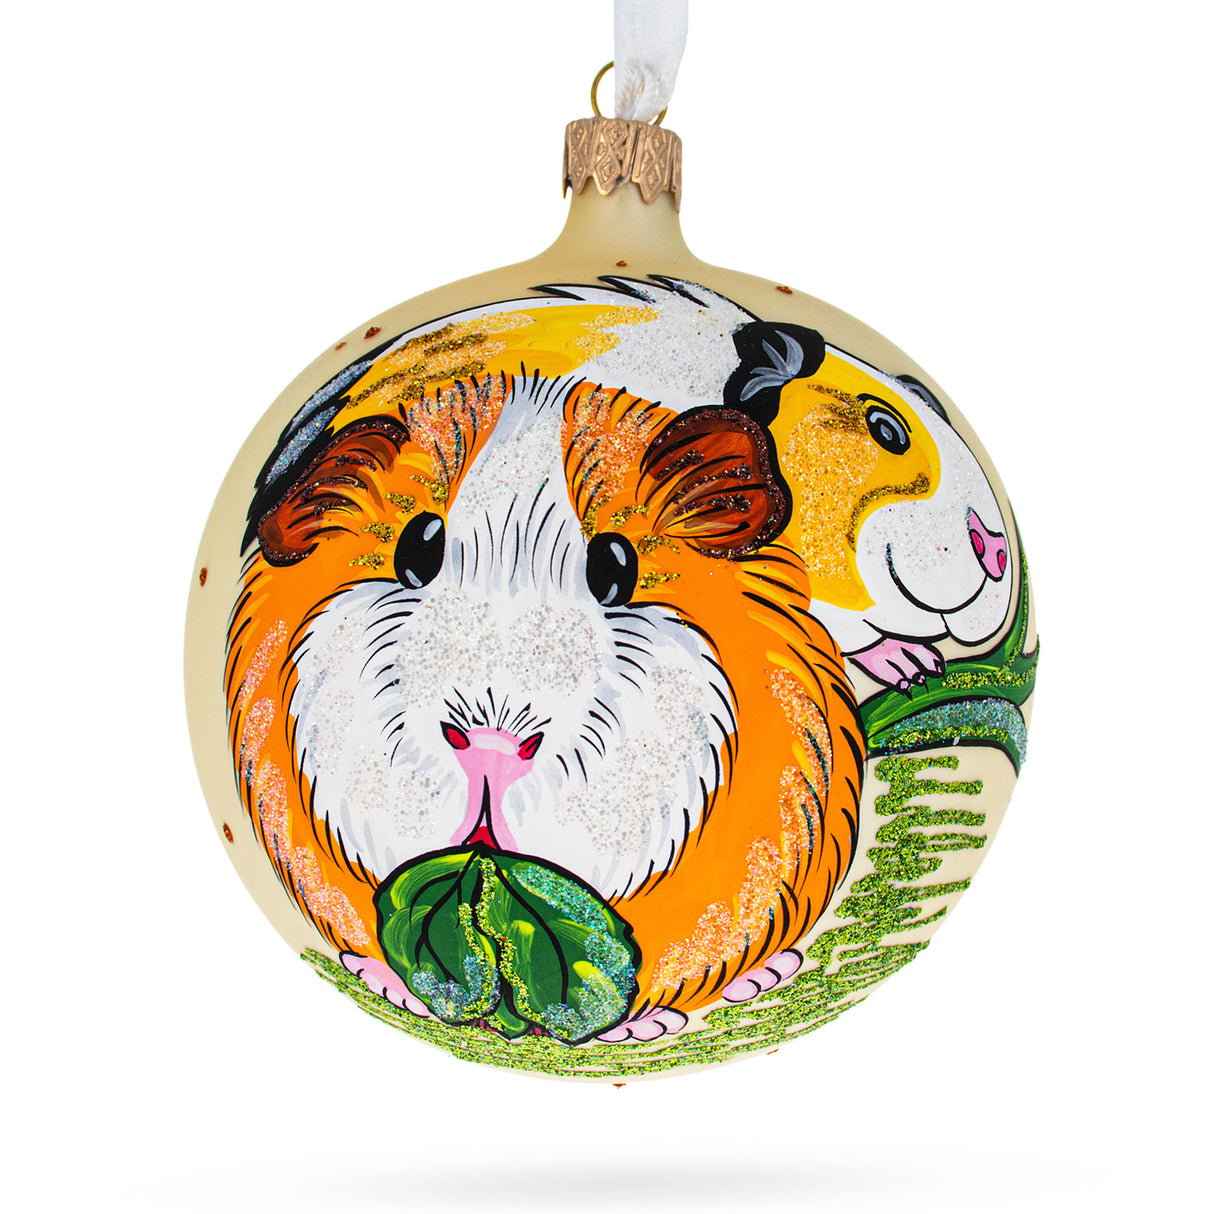 Adorable Guinea Pigs Blown Glass Ball Christmas Ornament 4 Inches in Multi color, Round shape